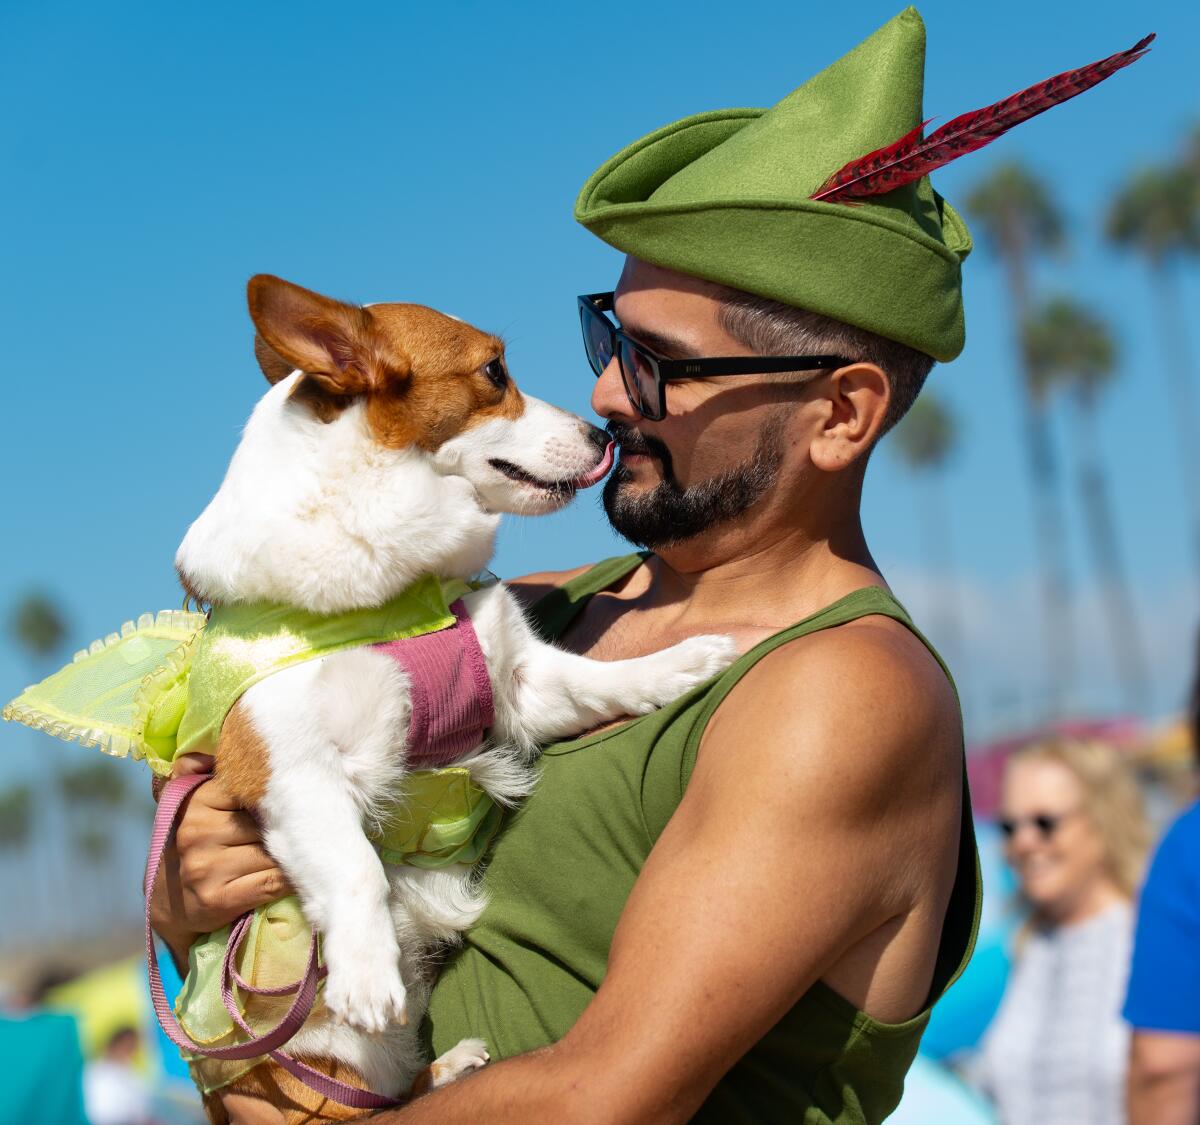 Molly and owner Alfonso Ortega, dressed as Disney's Peter Pan and Wendy.